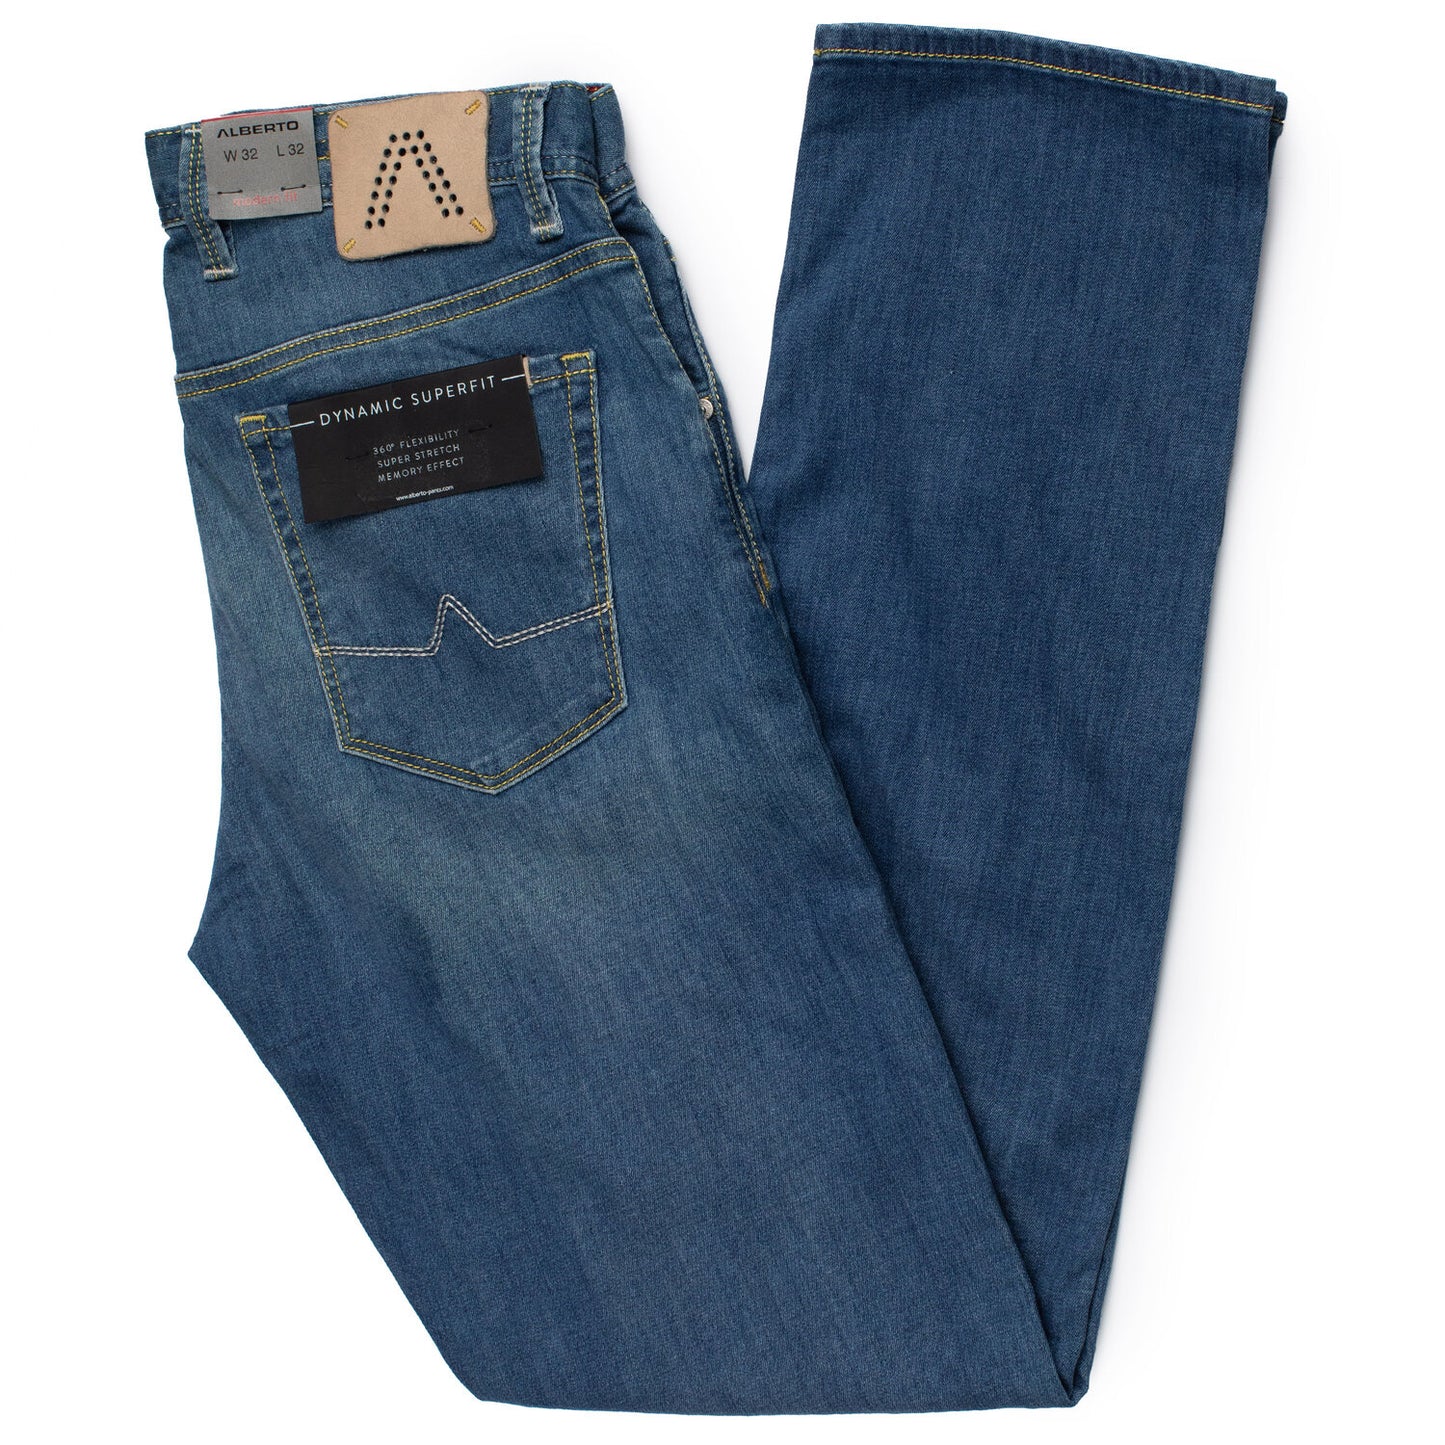 Alberto Jeans Stone Modern Fit 1987-855 in Mid Blue